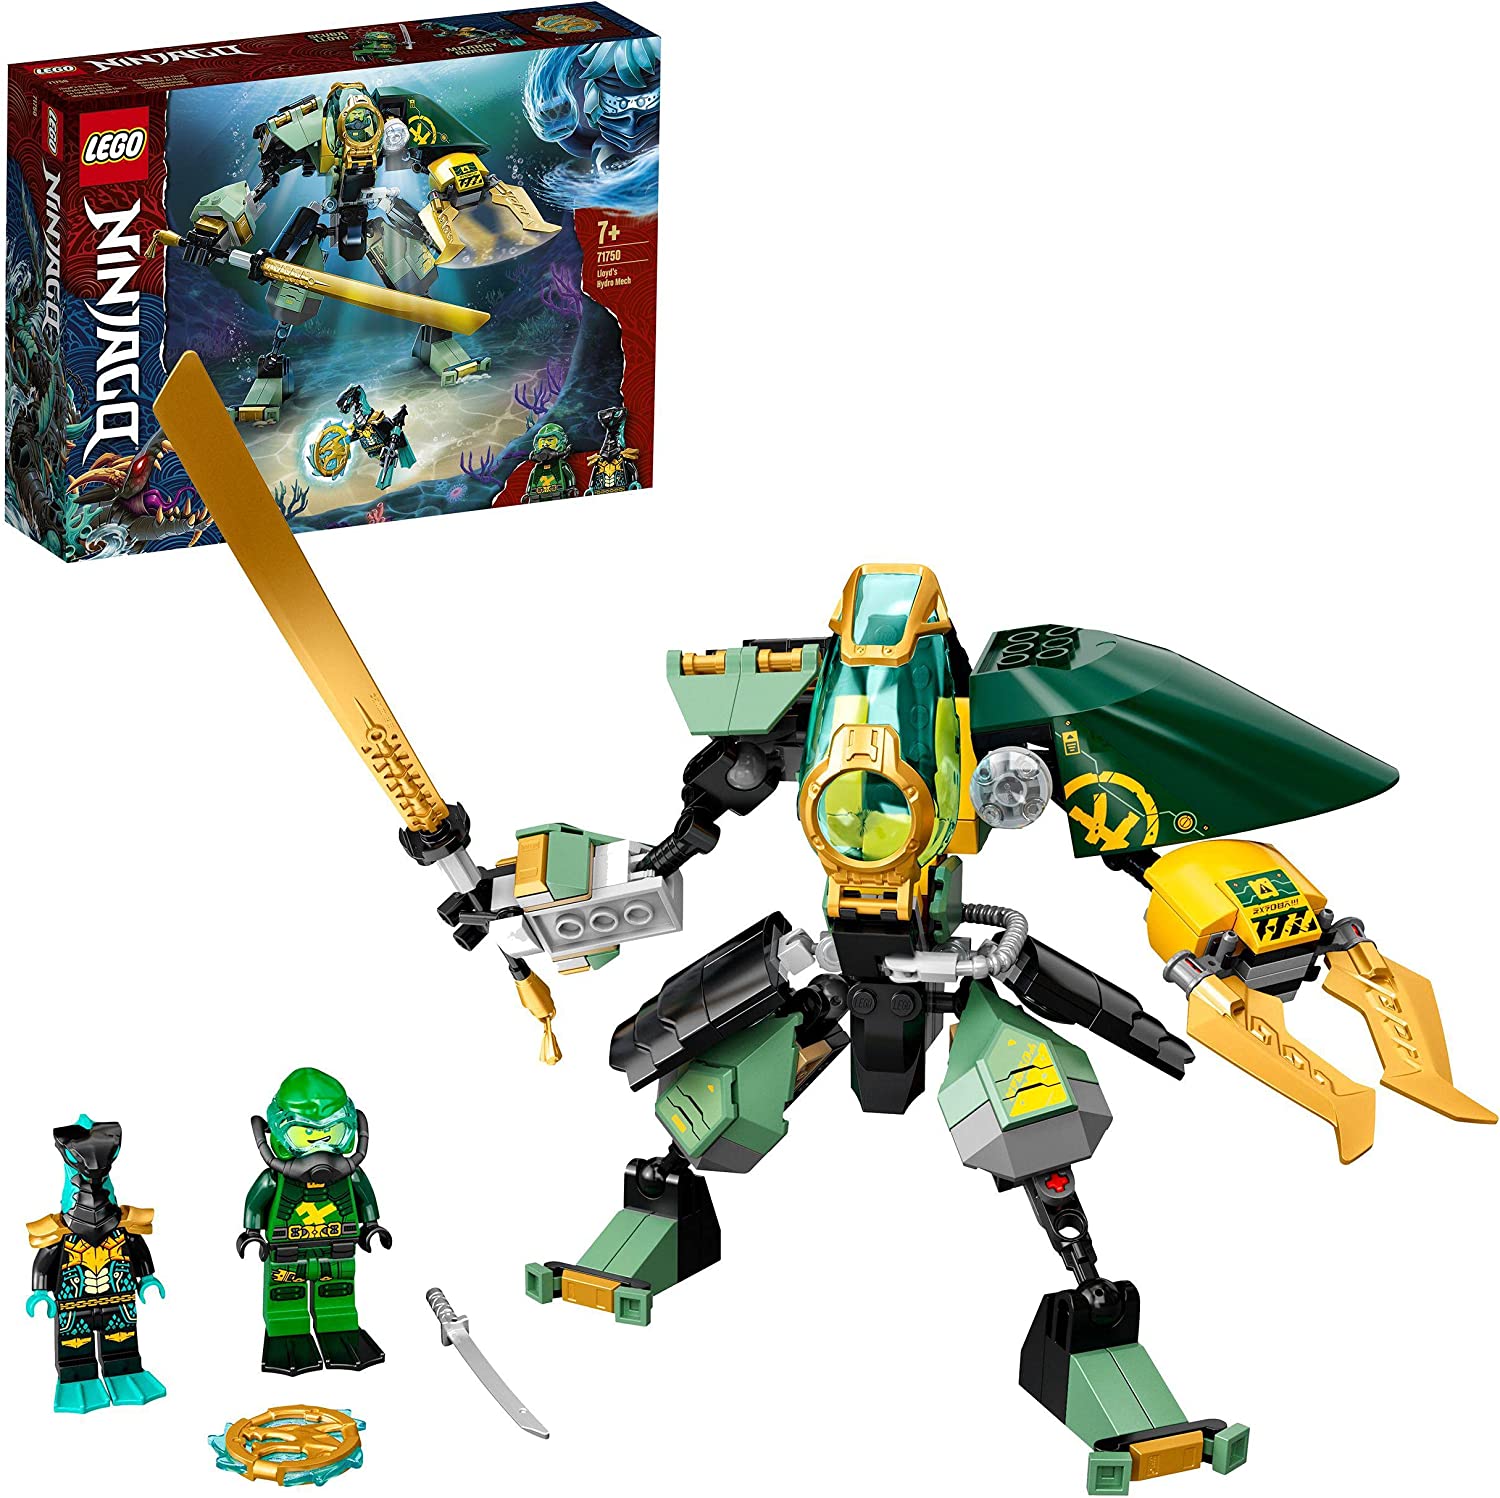 LEGO 71750 NINJAGO Lloyds Hydro-Mech, Underwater Set, Toy for Boys and Girls from 7 Years with 2 Ninja Mini Figures